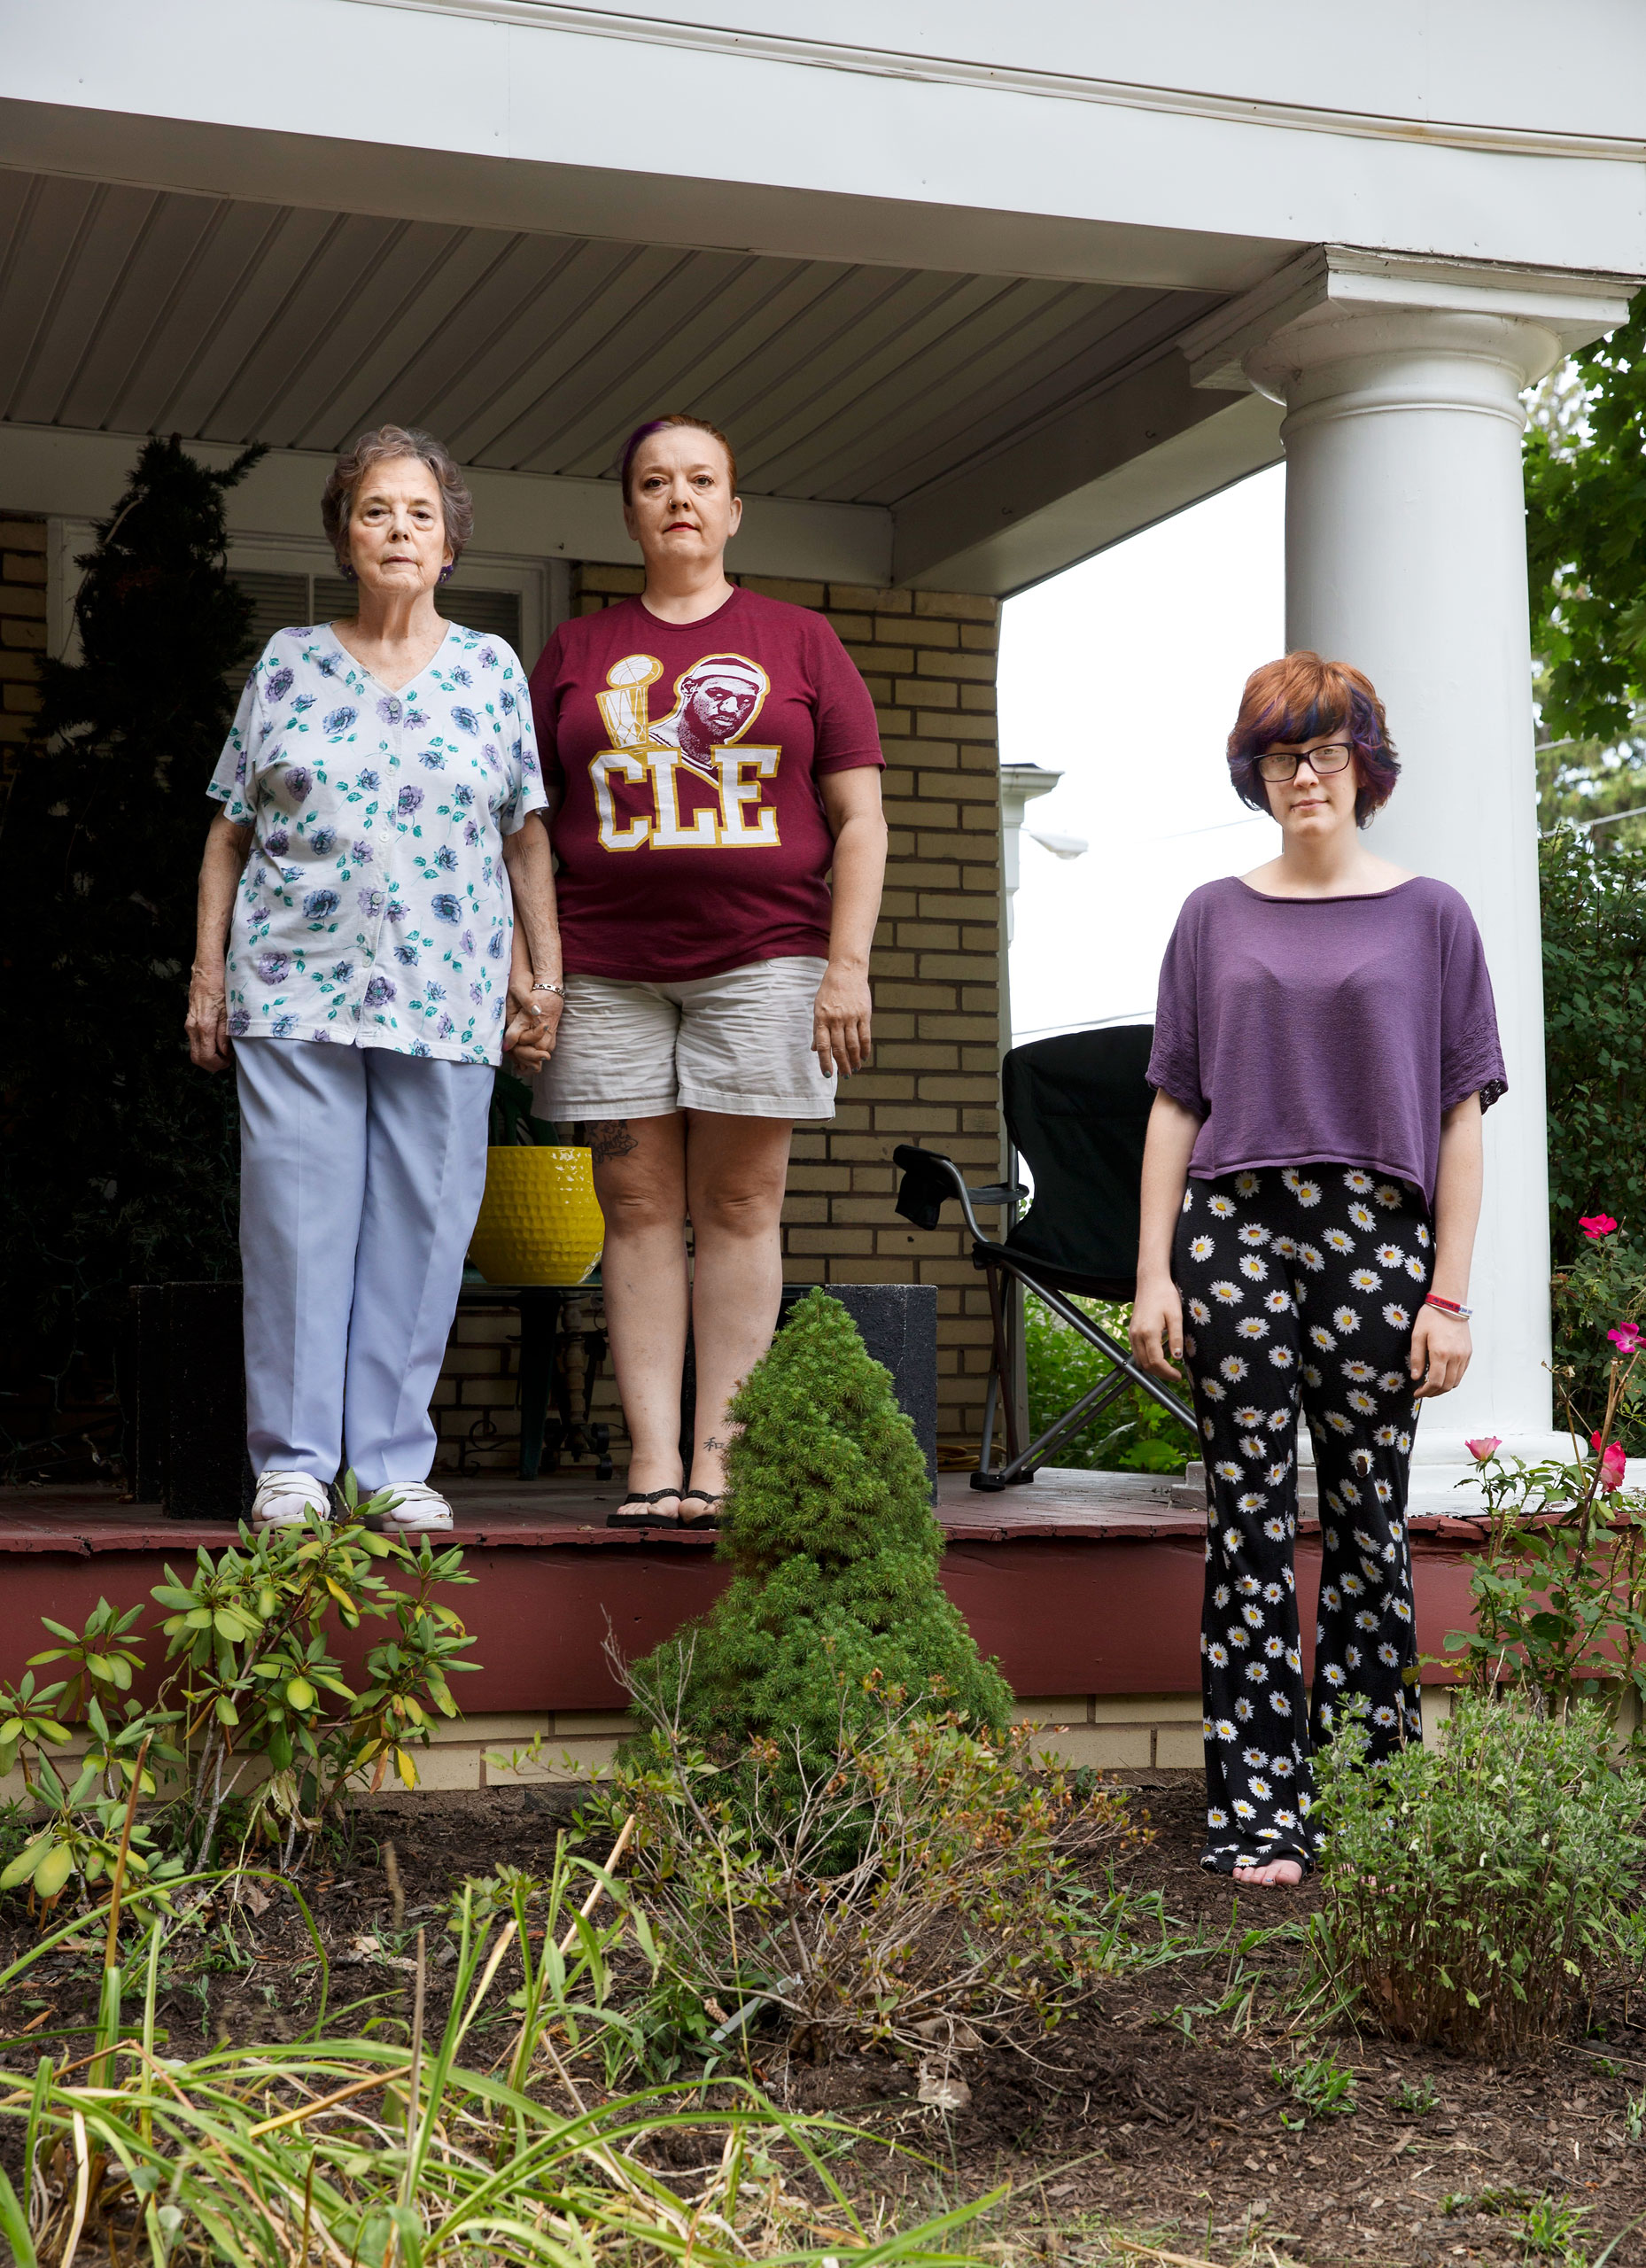 Carolyn Smith, 78; Cindy Smith, 49; and Josephine Sicking, 18, in front of Cindy’s home in Cleveland Heights, Ohio (Christopher Morris—VII for TIME)